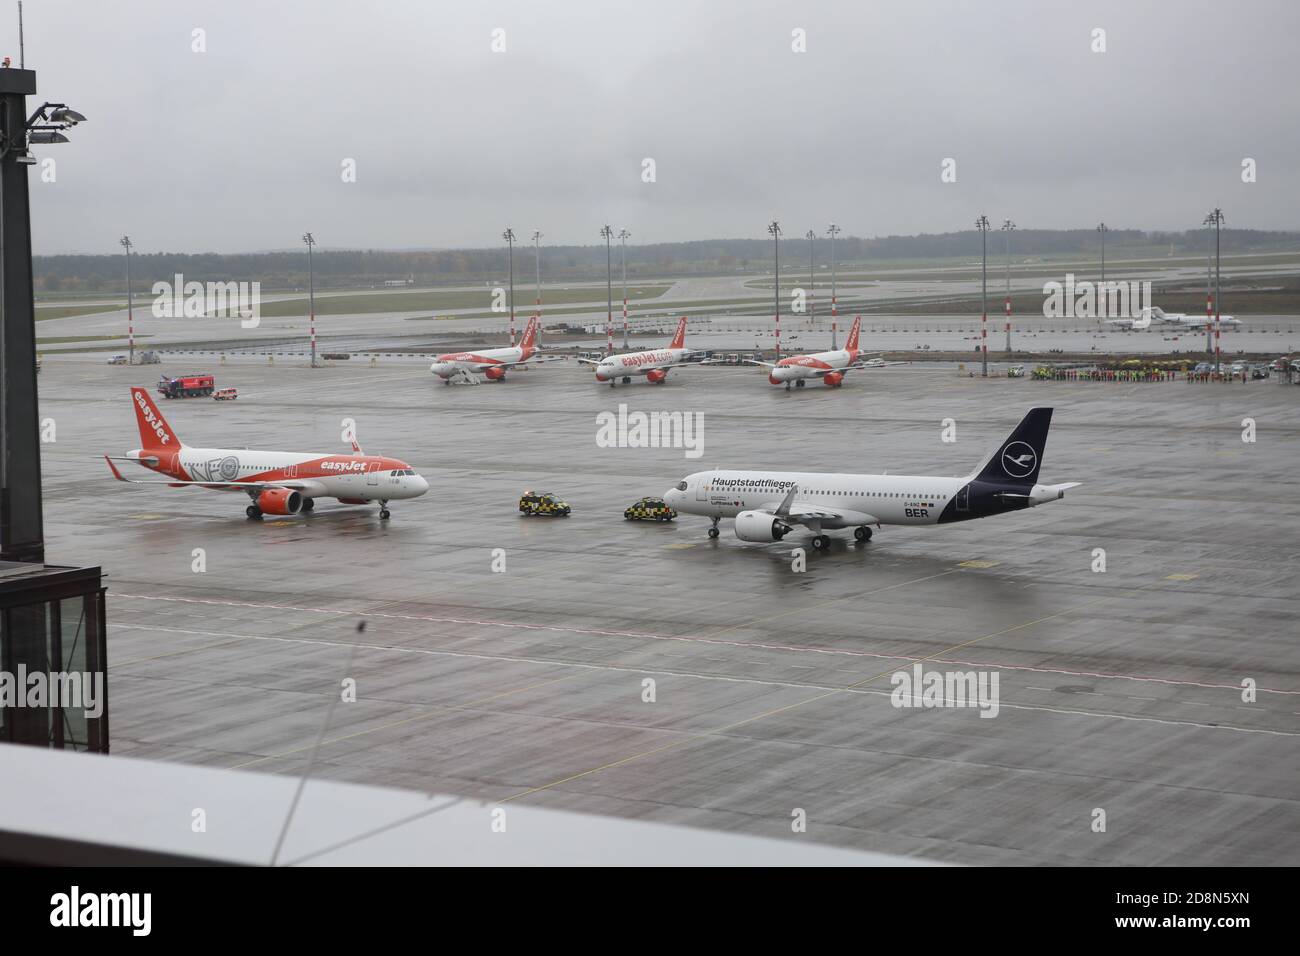 10/31/2020, Schönefeld, Germany, Arrival of the first easyJet and the first Lufthansa flight at the new Berlin Brandenburg Willy Brandt Airport in Schönefeld.. Arrival of the first two flights from easyJet and Lufthansa to the new Berlin Brandenburg Willy Brandt Airport in Schönefeld. on  October 31th. Stock Photo